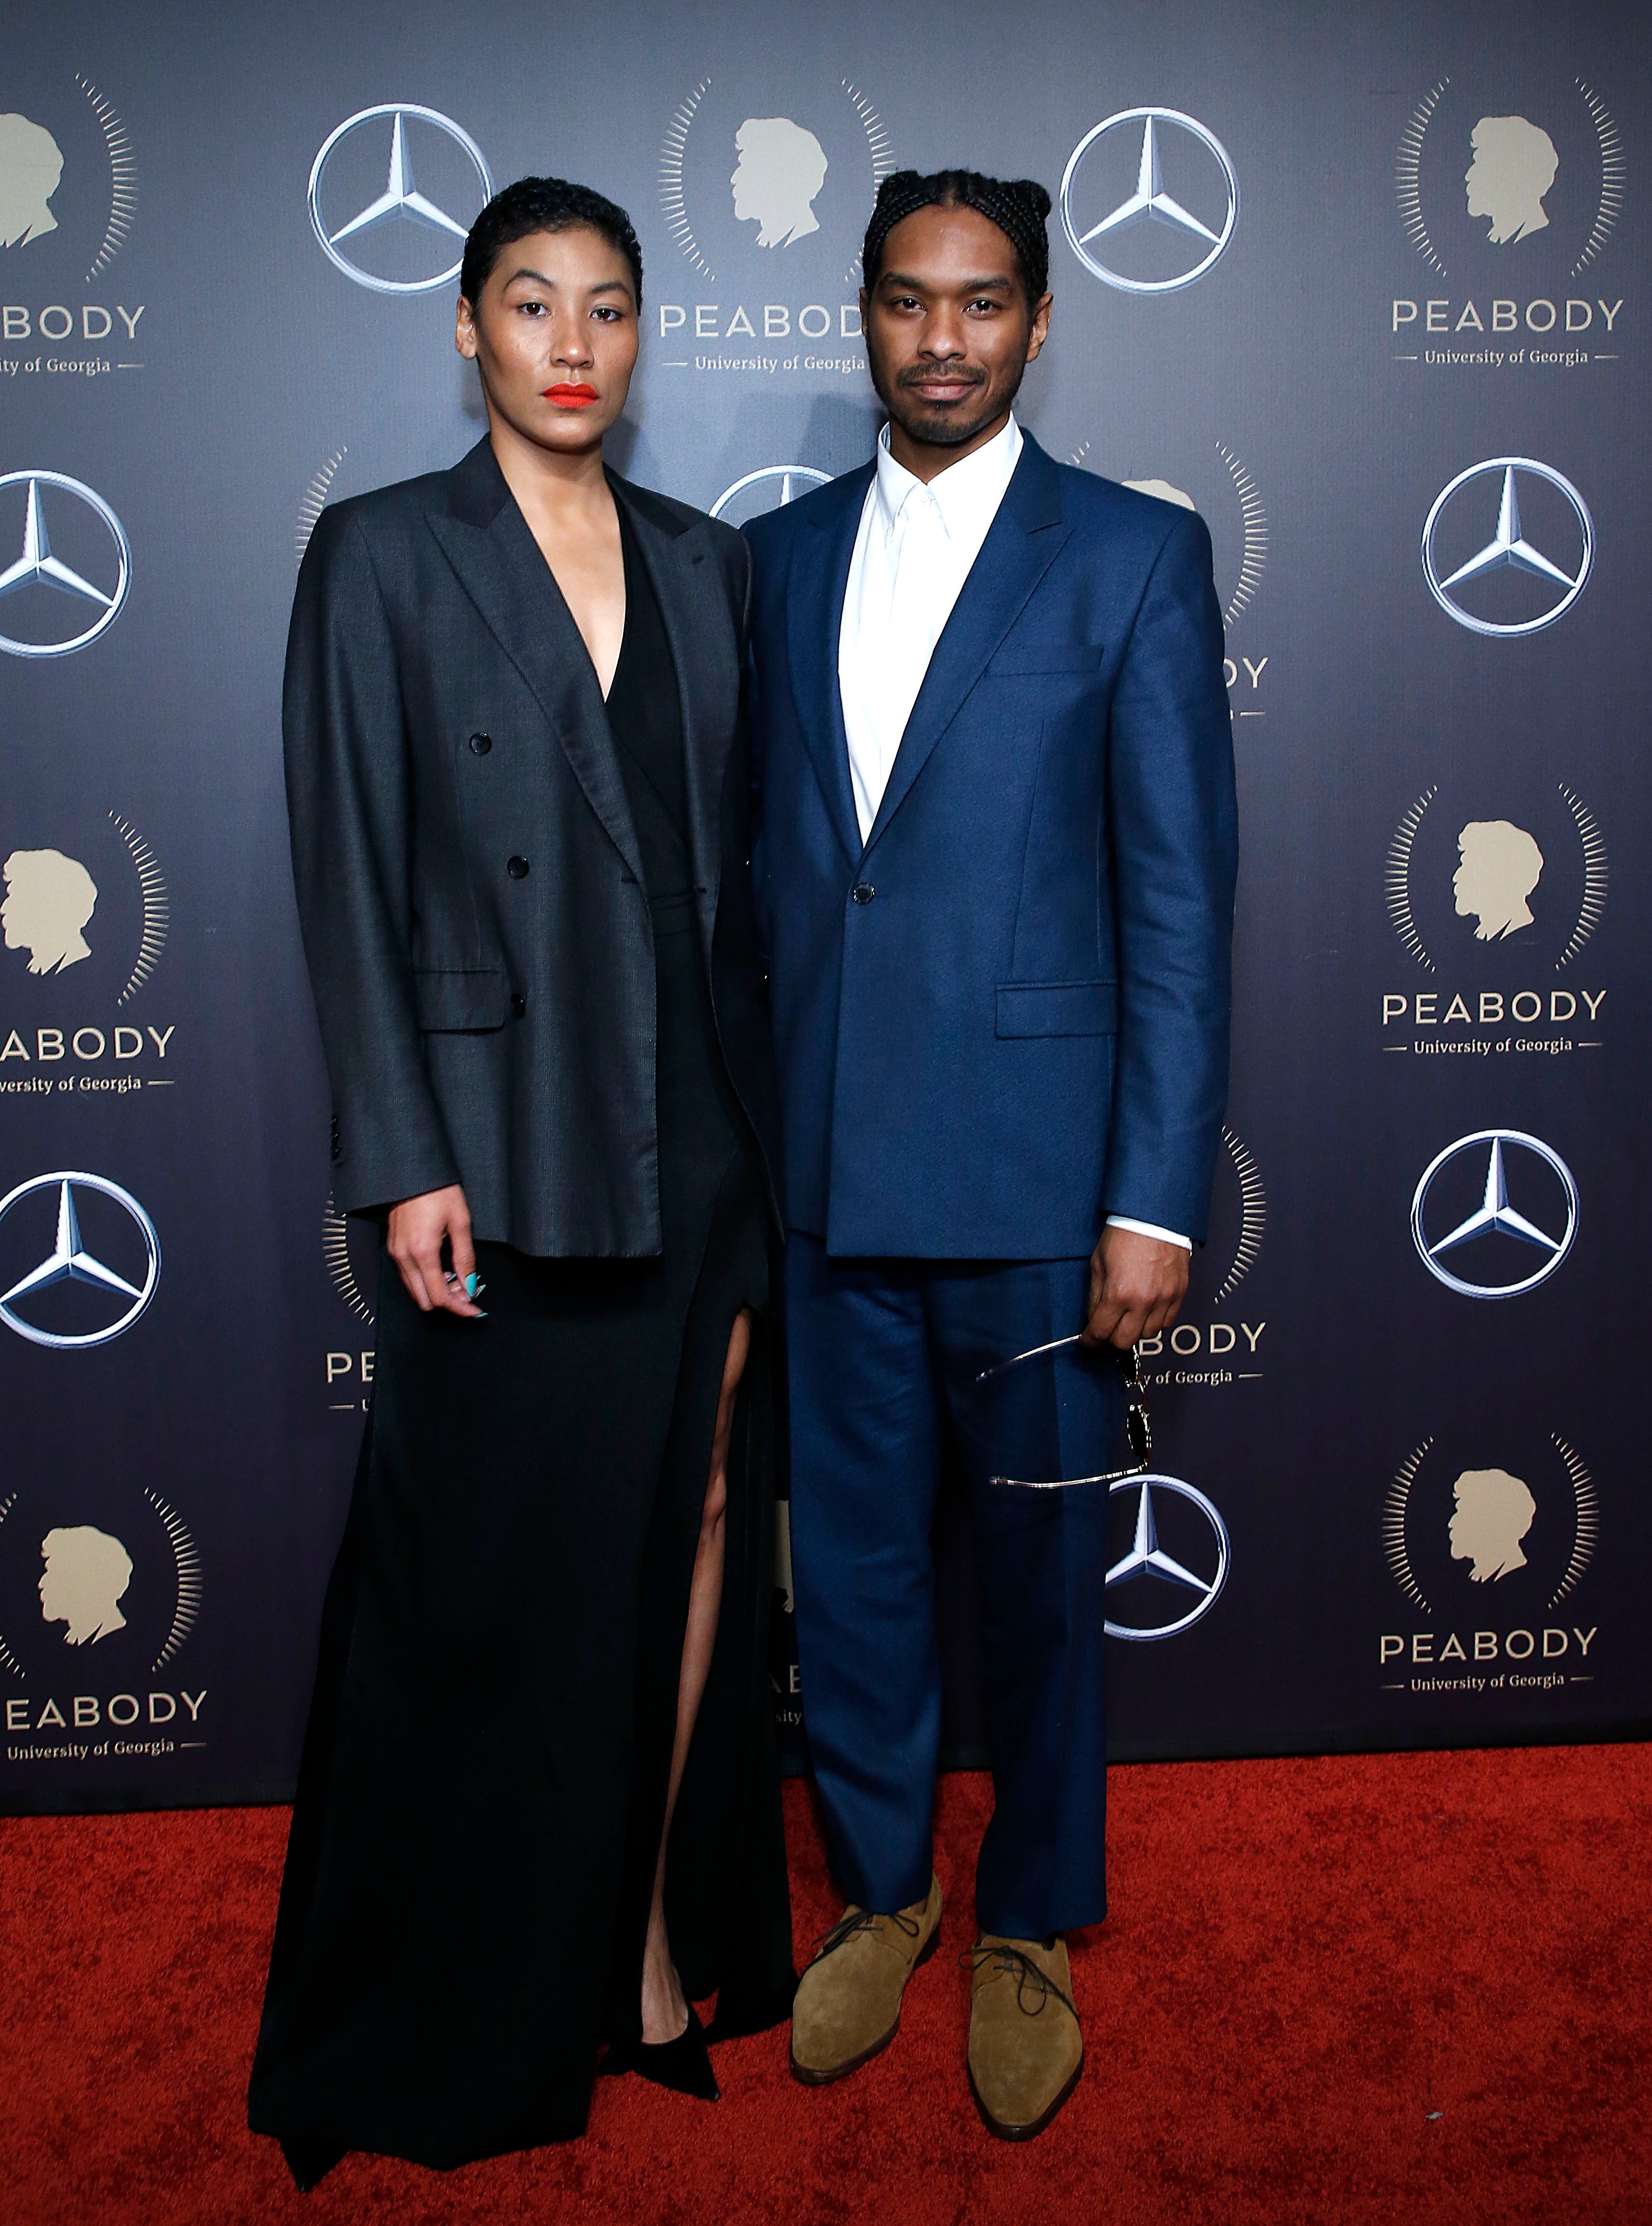 Spike Lee, Tonya Lewis Lee, DeWanda Wise, And More Celebs Out And About